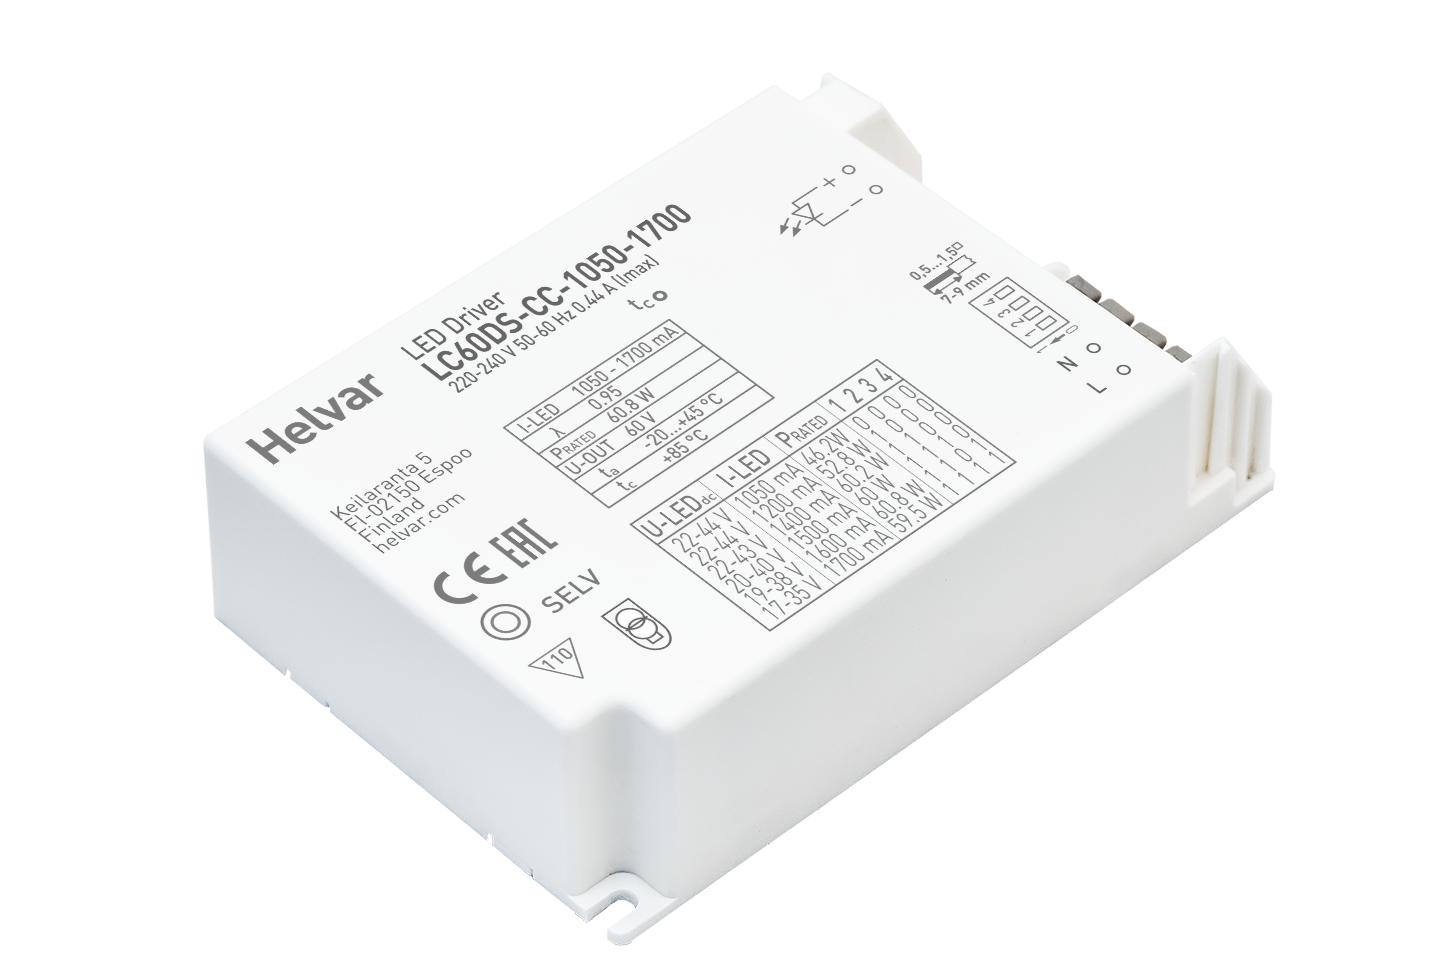 LC60DS-CC-1050-1700 LED Driver Helvar - Easy Control Gear